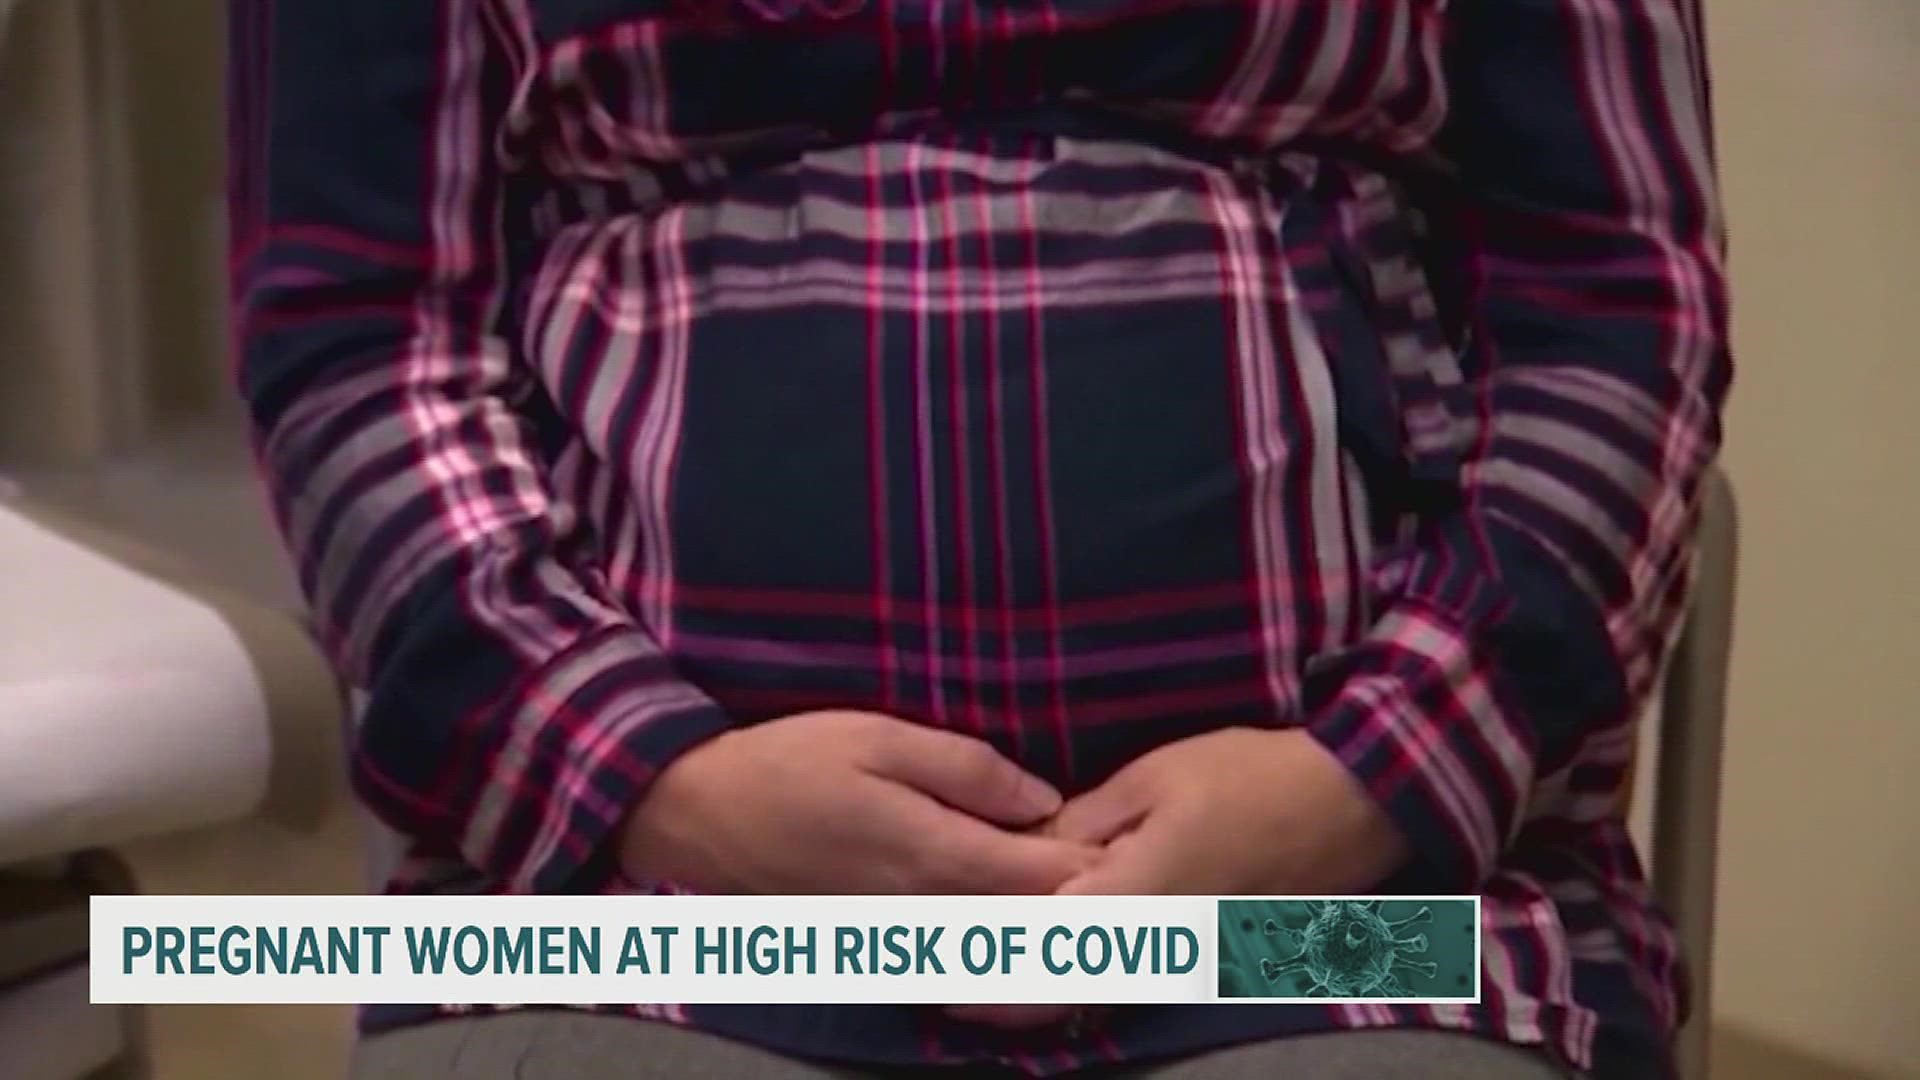 New variants of COVID-19 are proving especially dangerous to pregnant women.